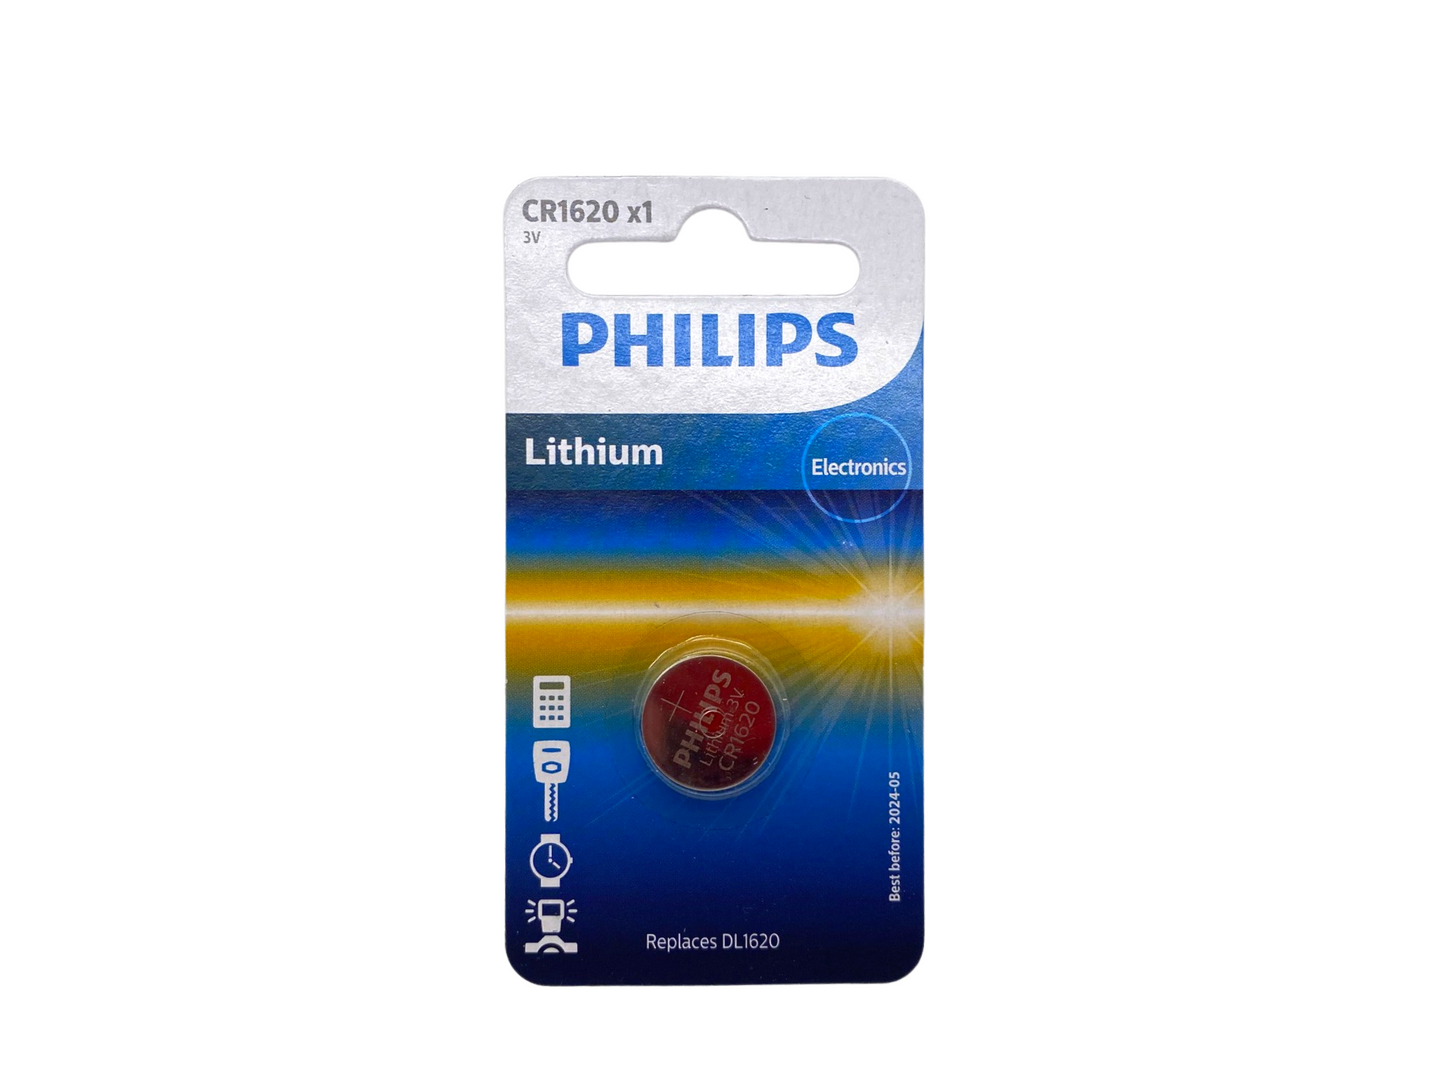 Philips CR1620 Lithium Cell Battery